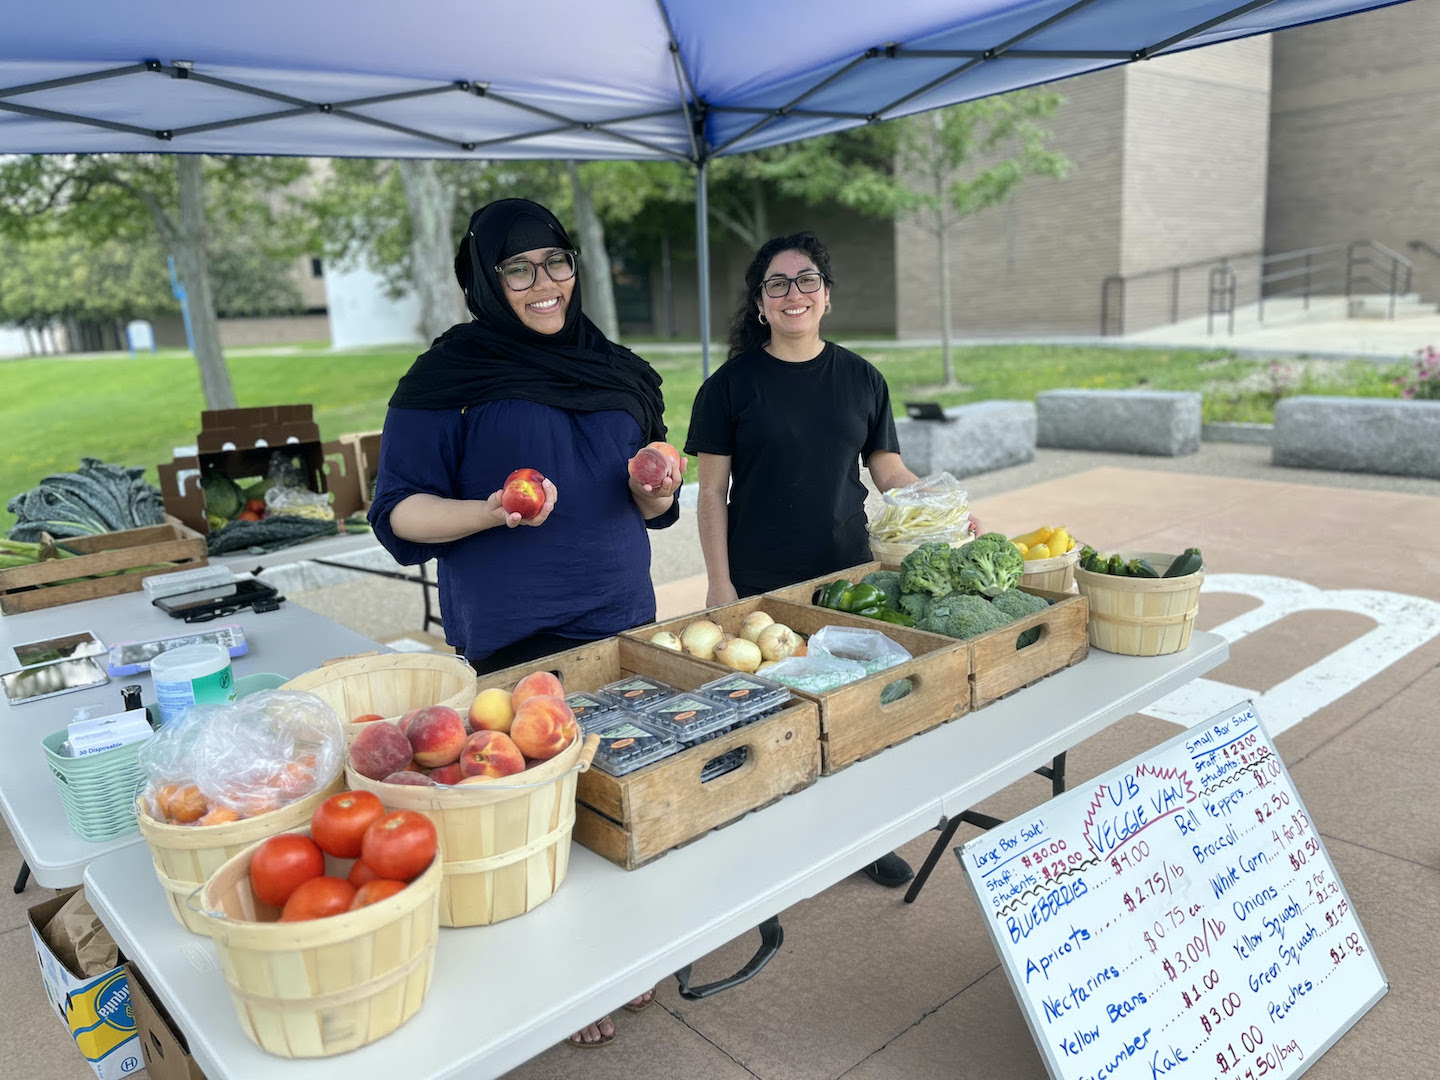 UB's Veggie Van on-campus mobile market is bringing fresh produce closer to UB students, faculty and staff. (Photo by Douglas Levere // courtesy of UB)